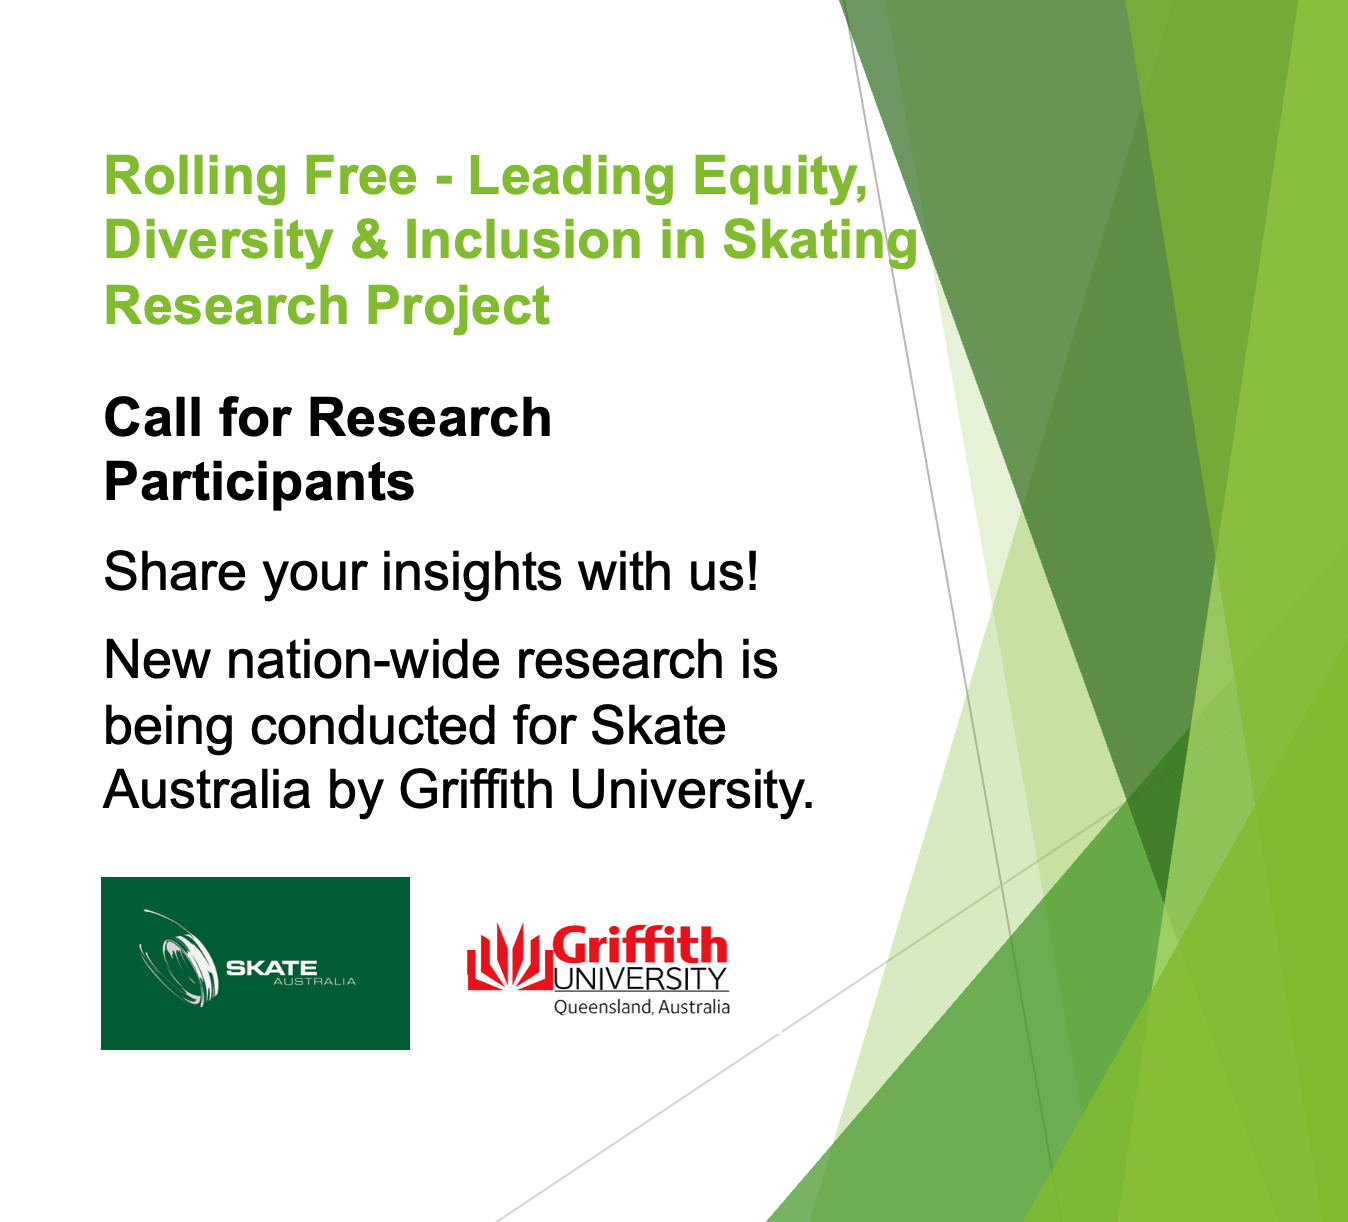 Rolling Free Project - Leading Equity, Diversity & Inclusion in Skating